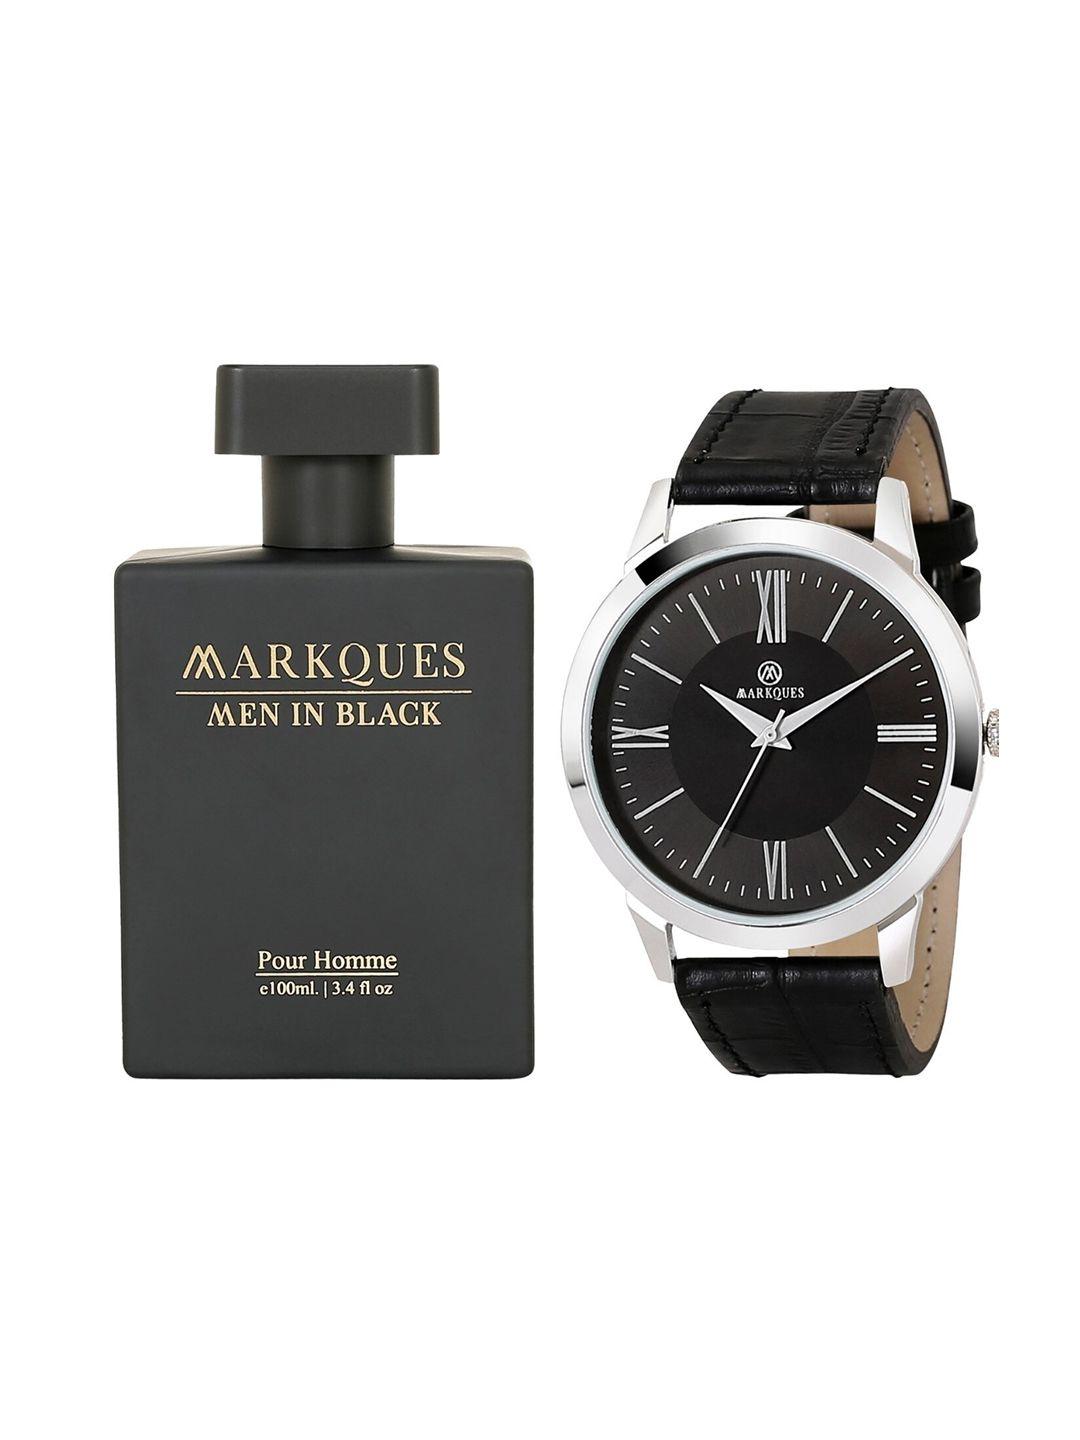 markques men perfume & watch accessory gift set